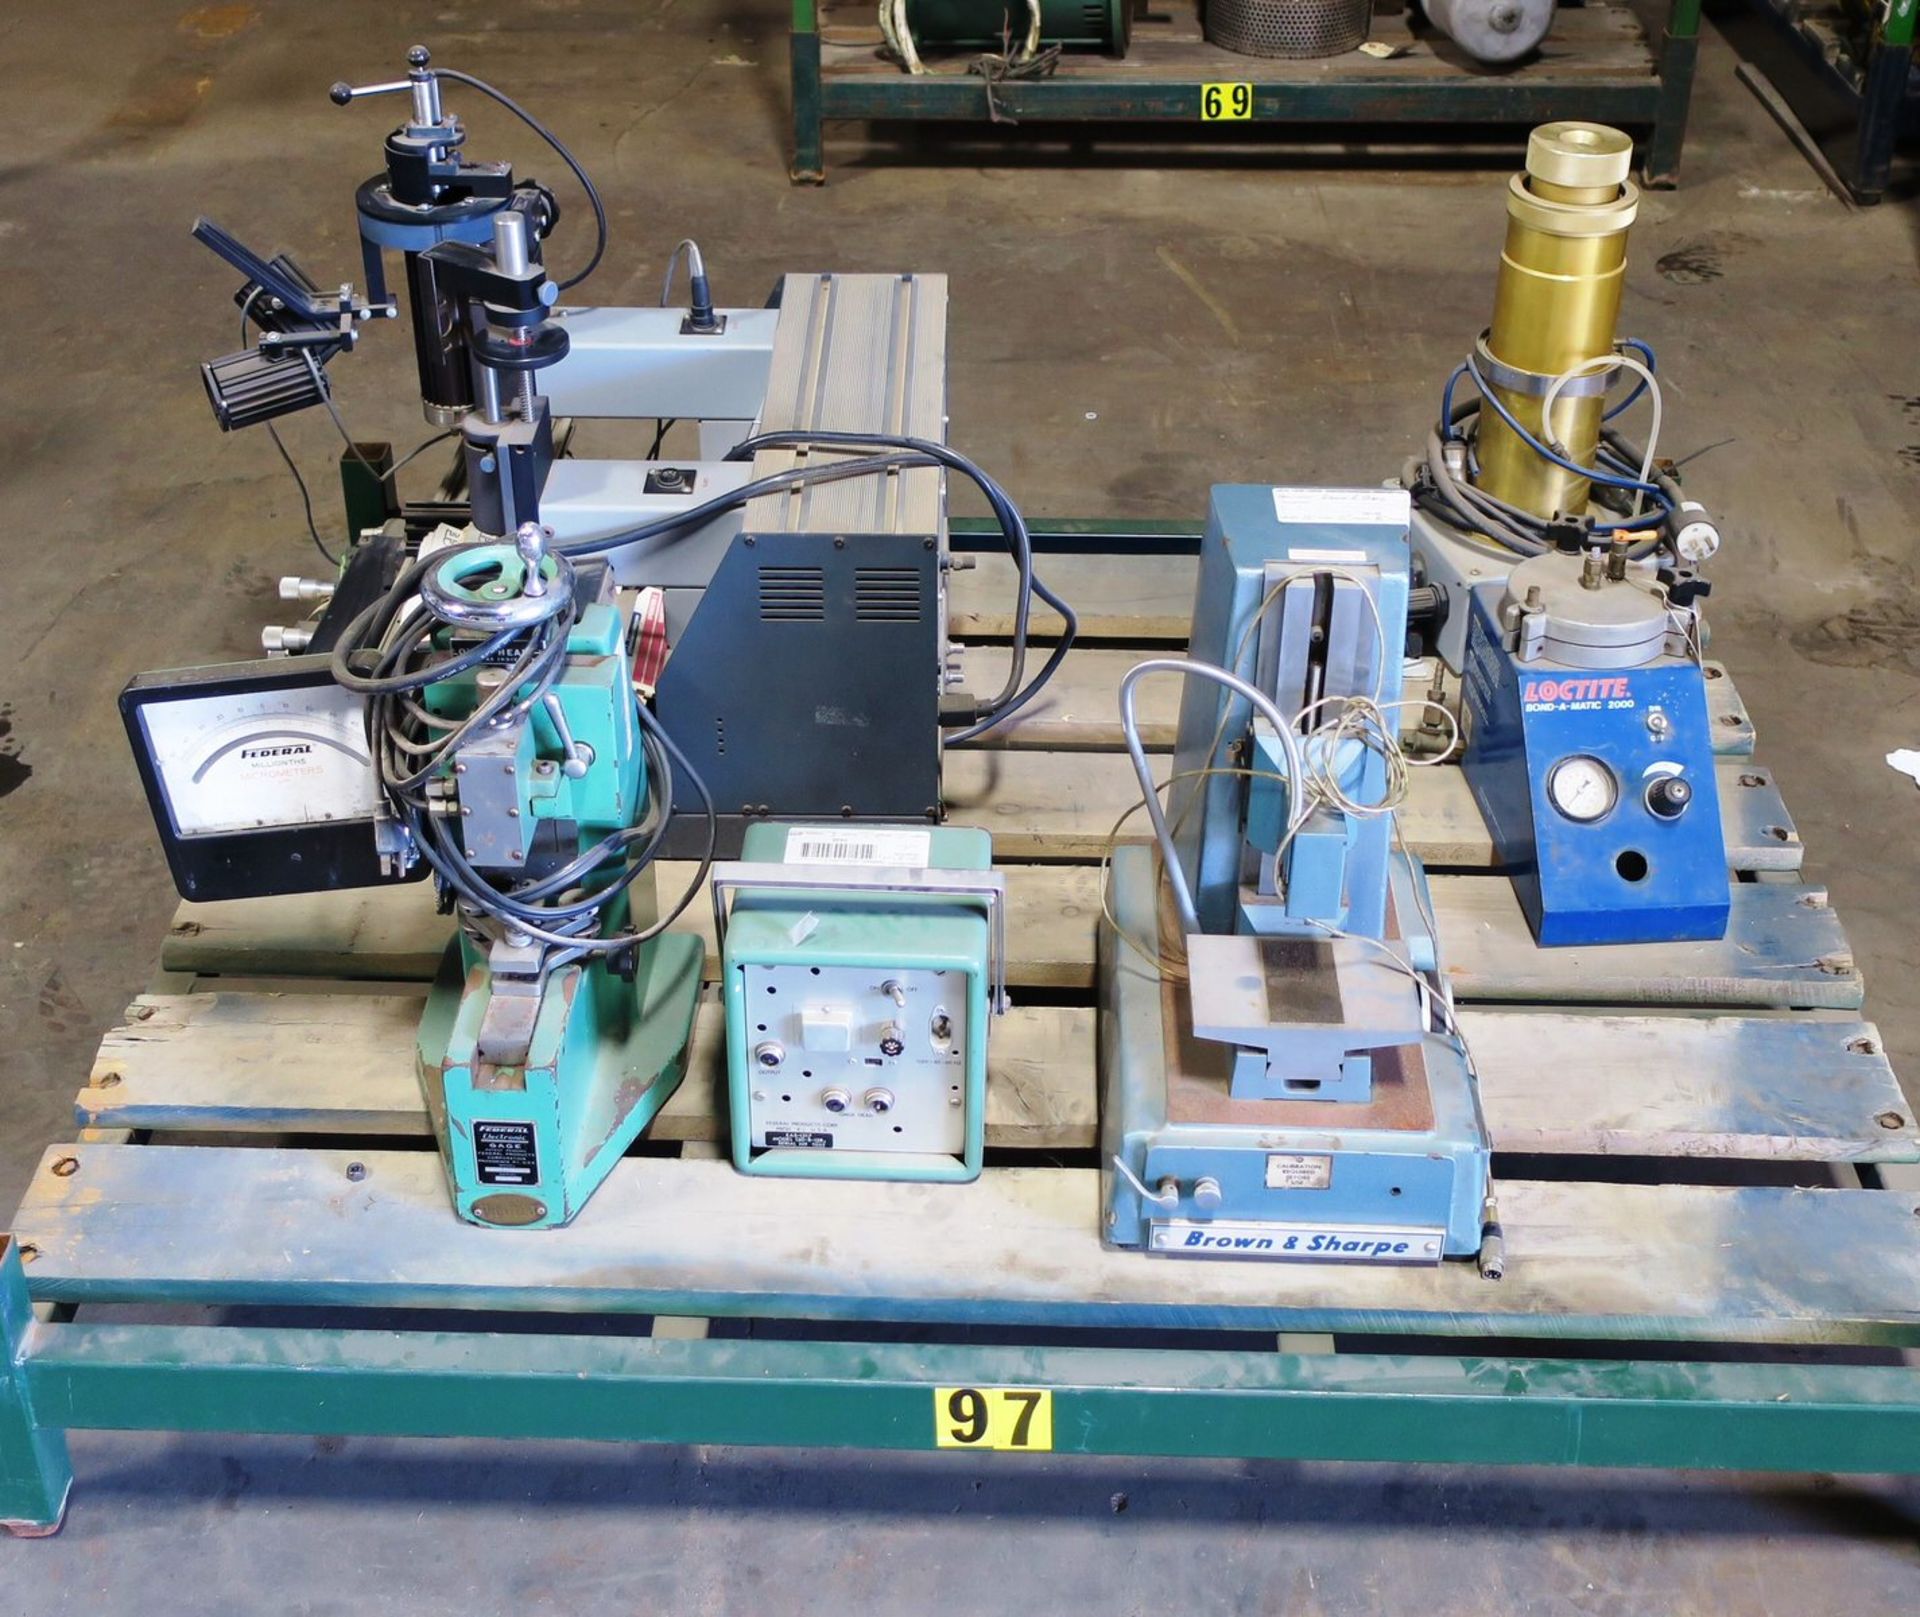 Brown & Sharpe Mdl 970 SLO-SYN Mtr, Federal Gage Block Comparator, Pace Craft SMT Rework Station